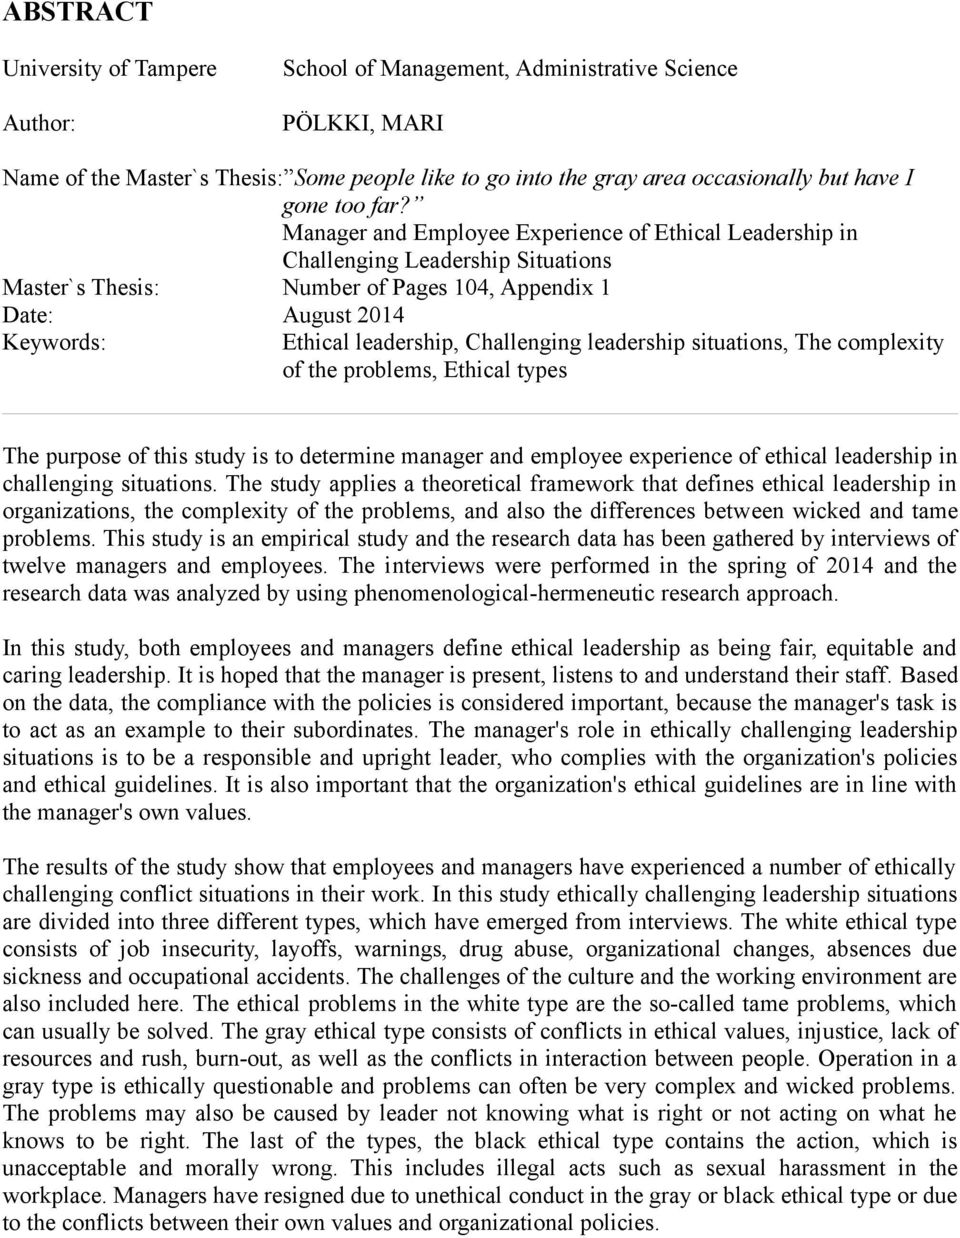 Manager and Employee Experience of Ethical Leadership in Challenging Leadership Situations Master`s Thesis: Number of Pages 104, Appendix 1 Date: August 2014 Keywords: Ethical leadership, Challenging